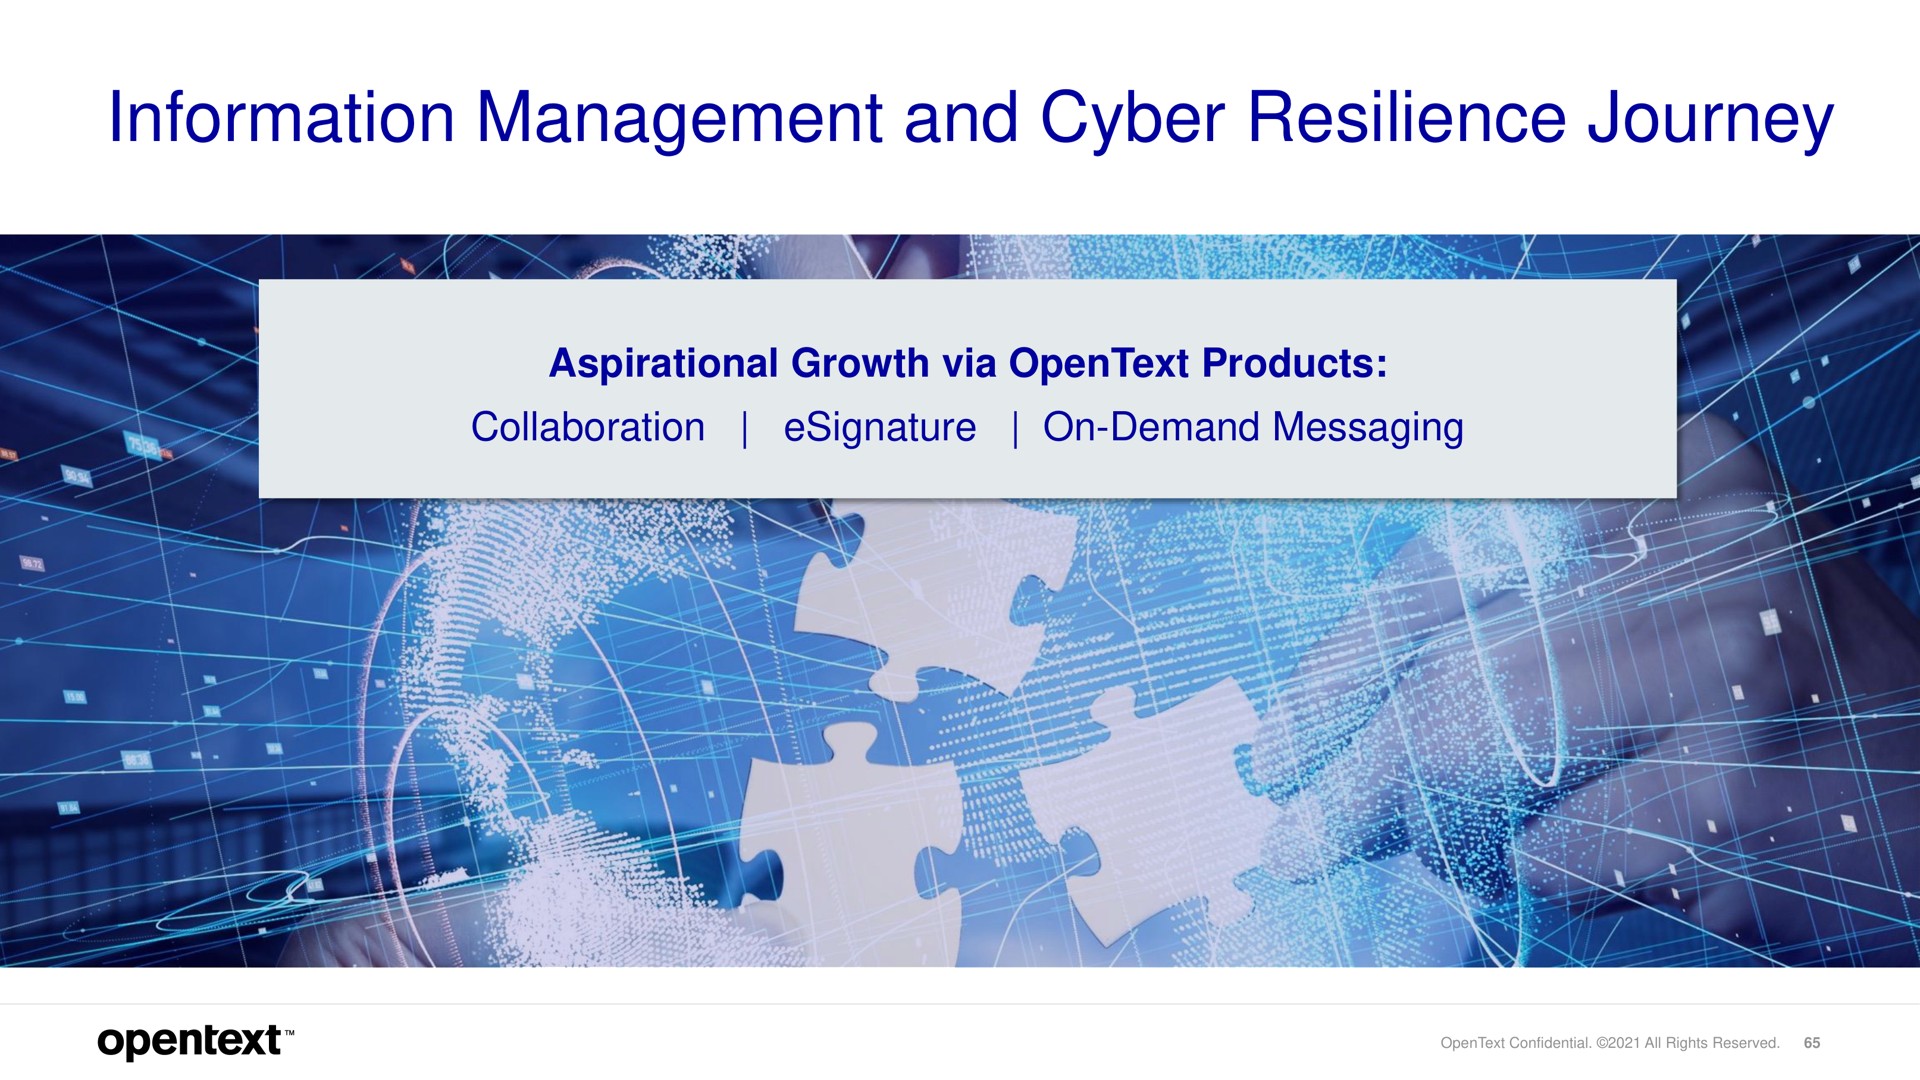 information management and resilience journey | OpenText